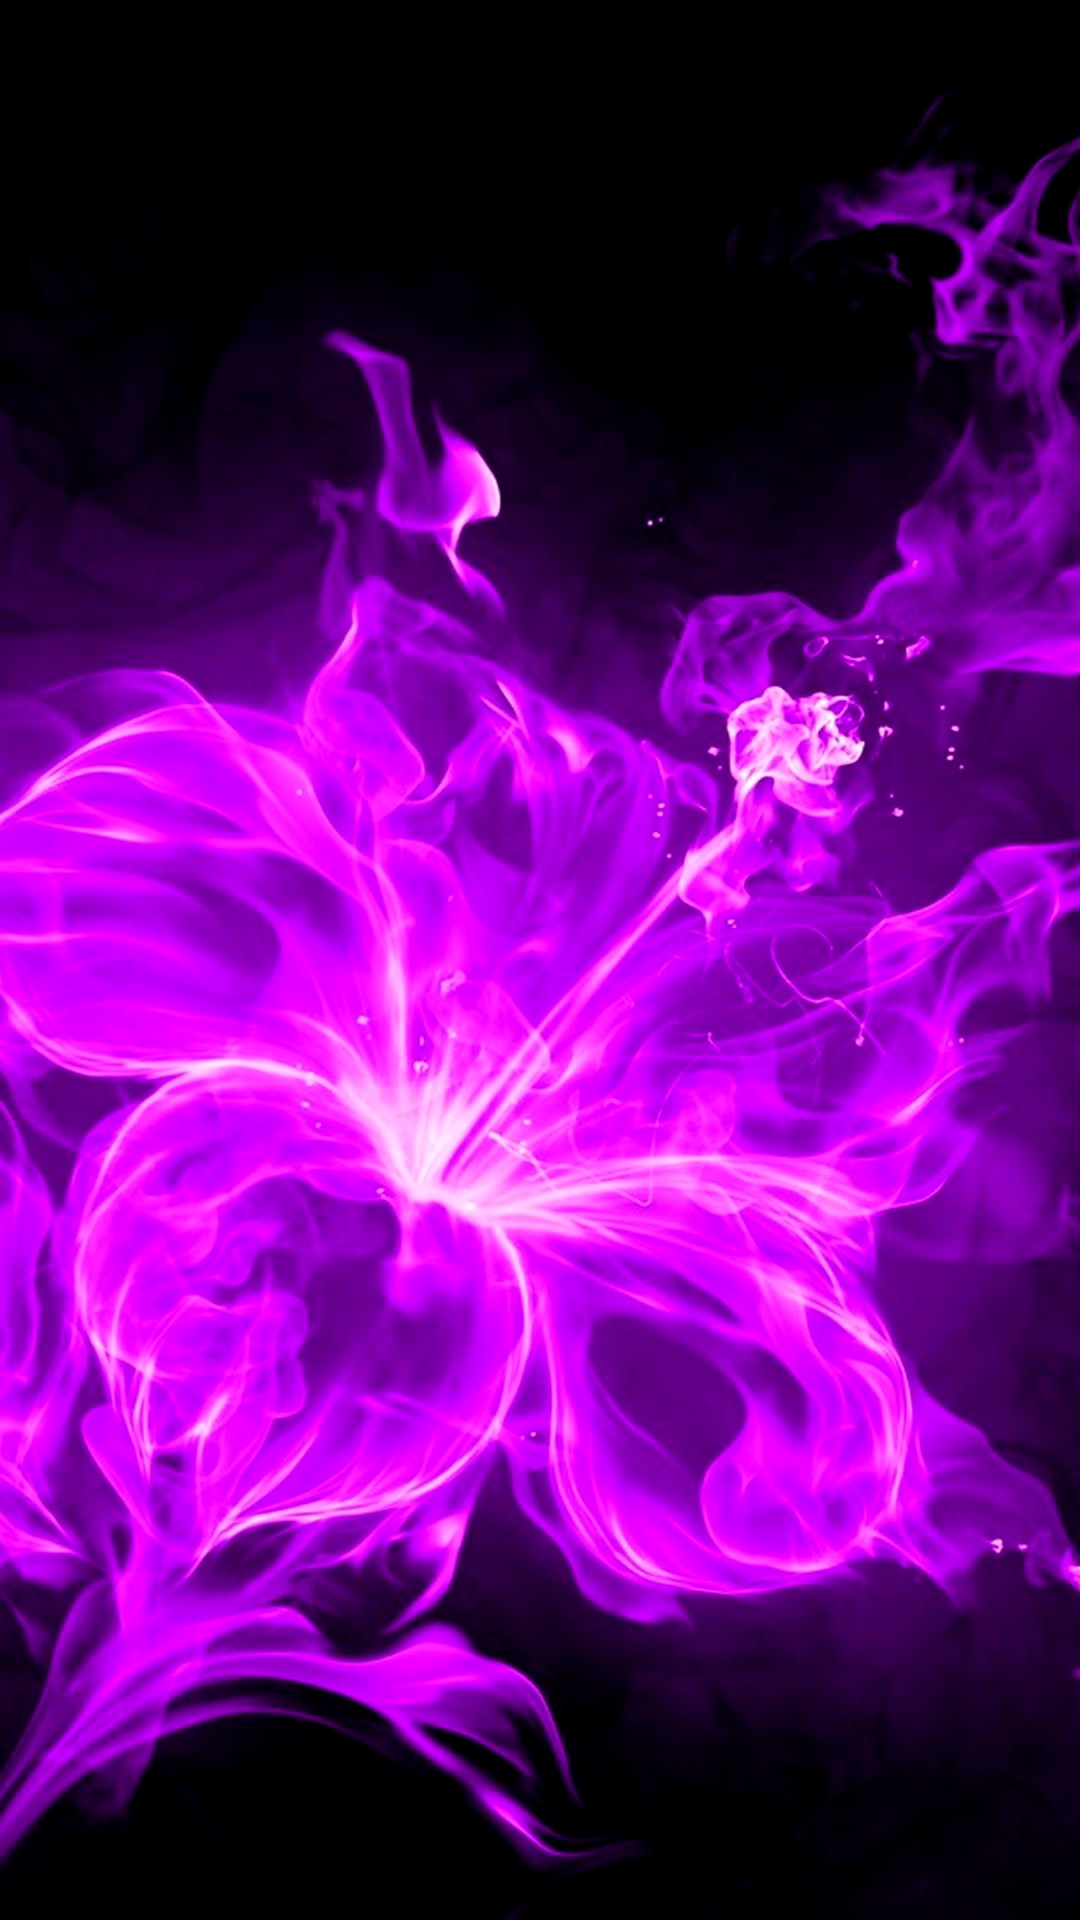 iPhone Wallpaper HD Neon Purple with high-resolution 1080x1920 pixel. You can use this wallpaper for your iPhone 5, 6, 7, 8, X, XS, XR backgrounds, Mobile Screensaver, or iPad Lock Screen